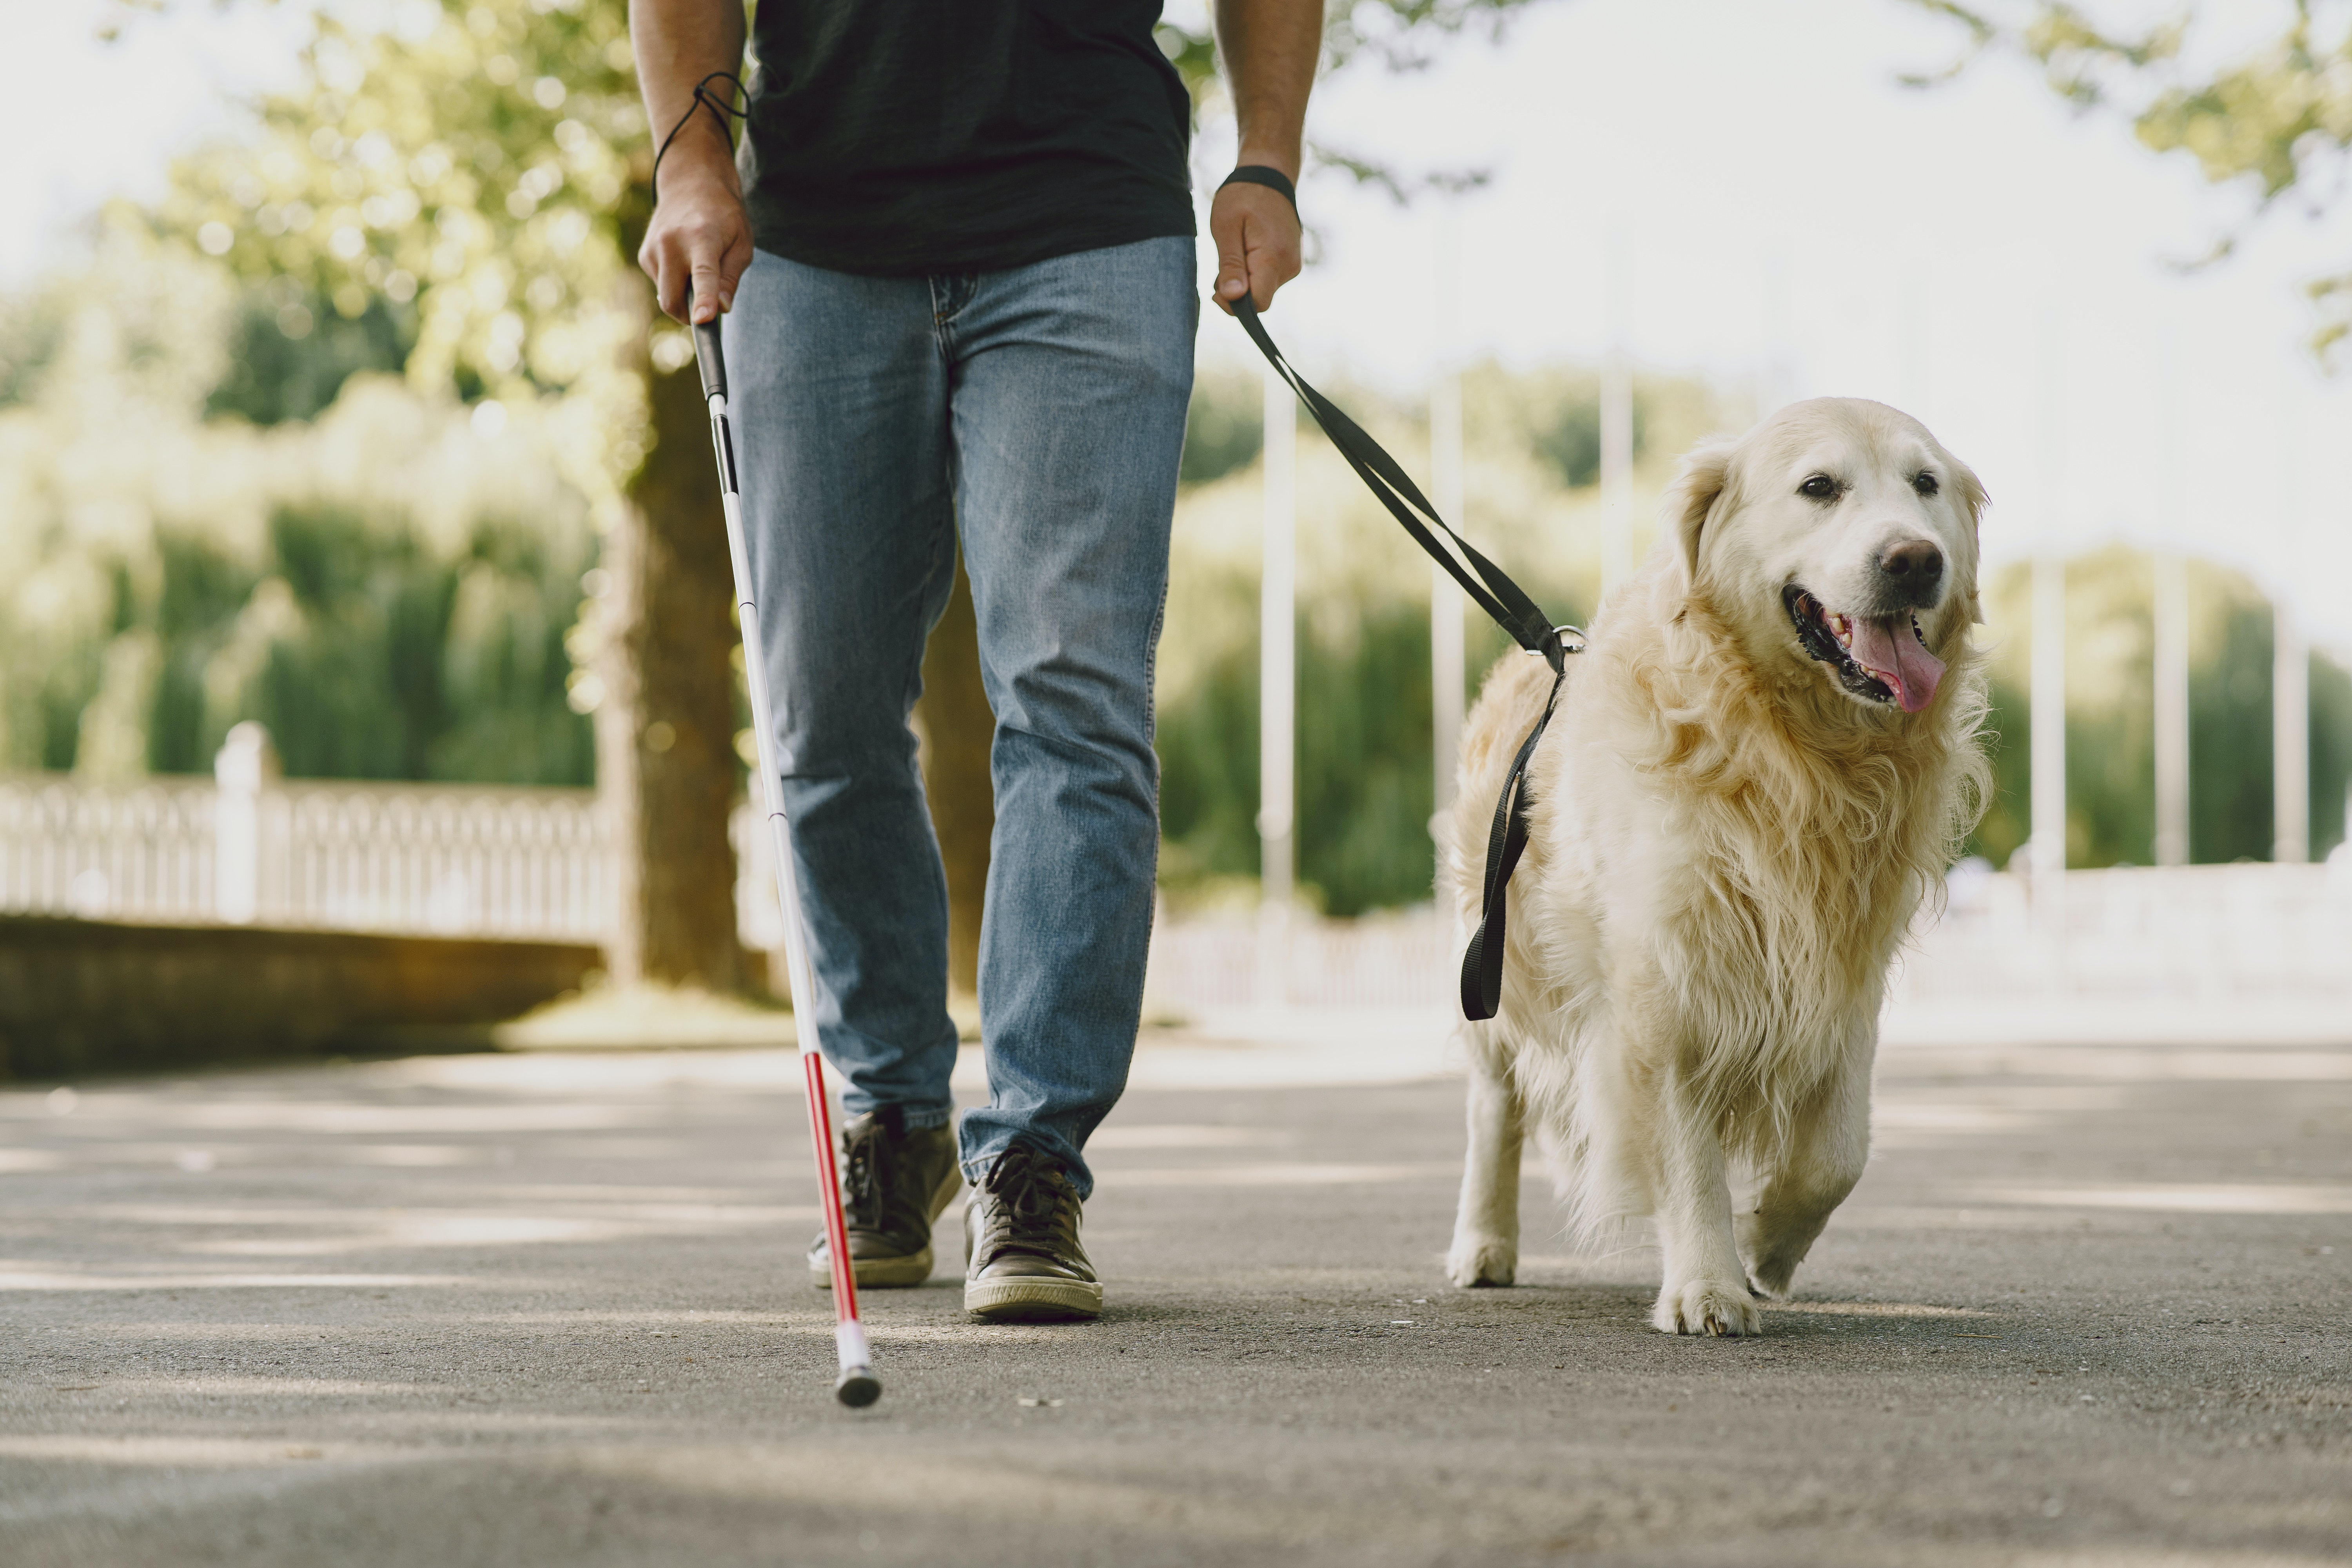 A man with a vision impairment is walking along a path. He has a cane to guide him and is also holding the lead of his guide dog - a blonde labrador.